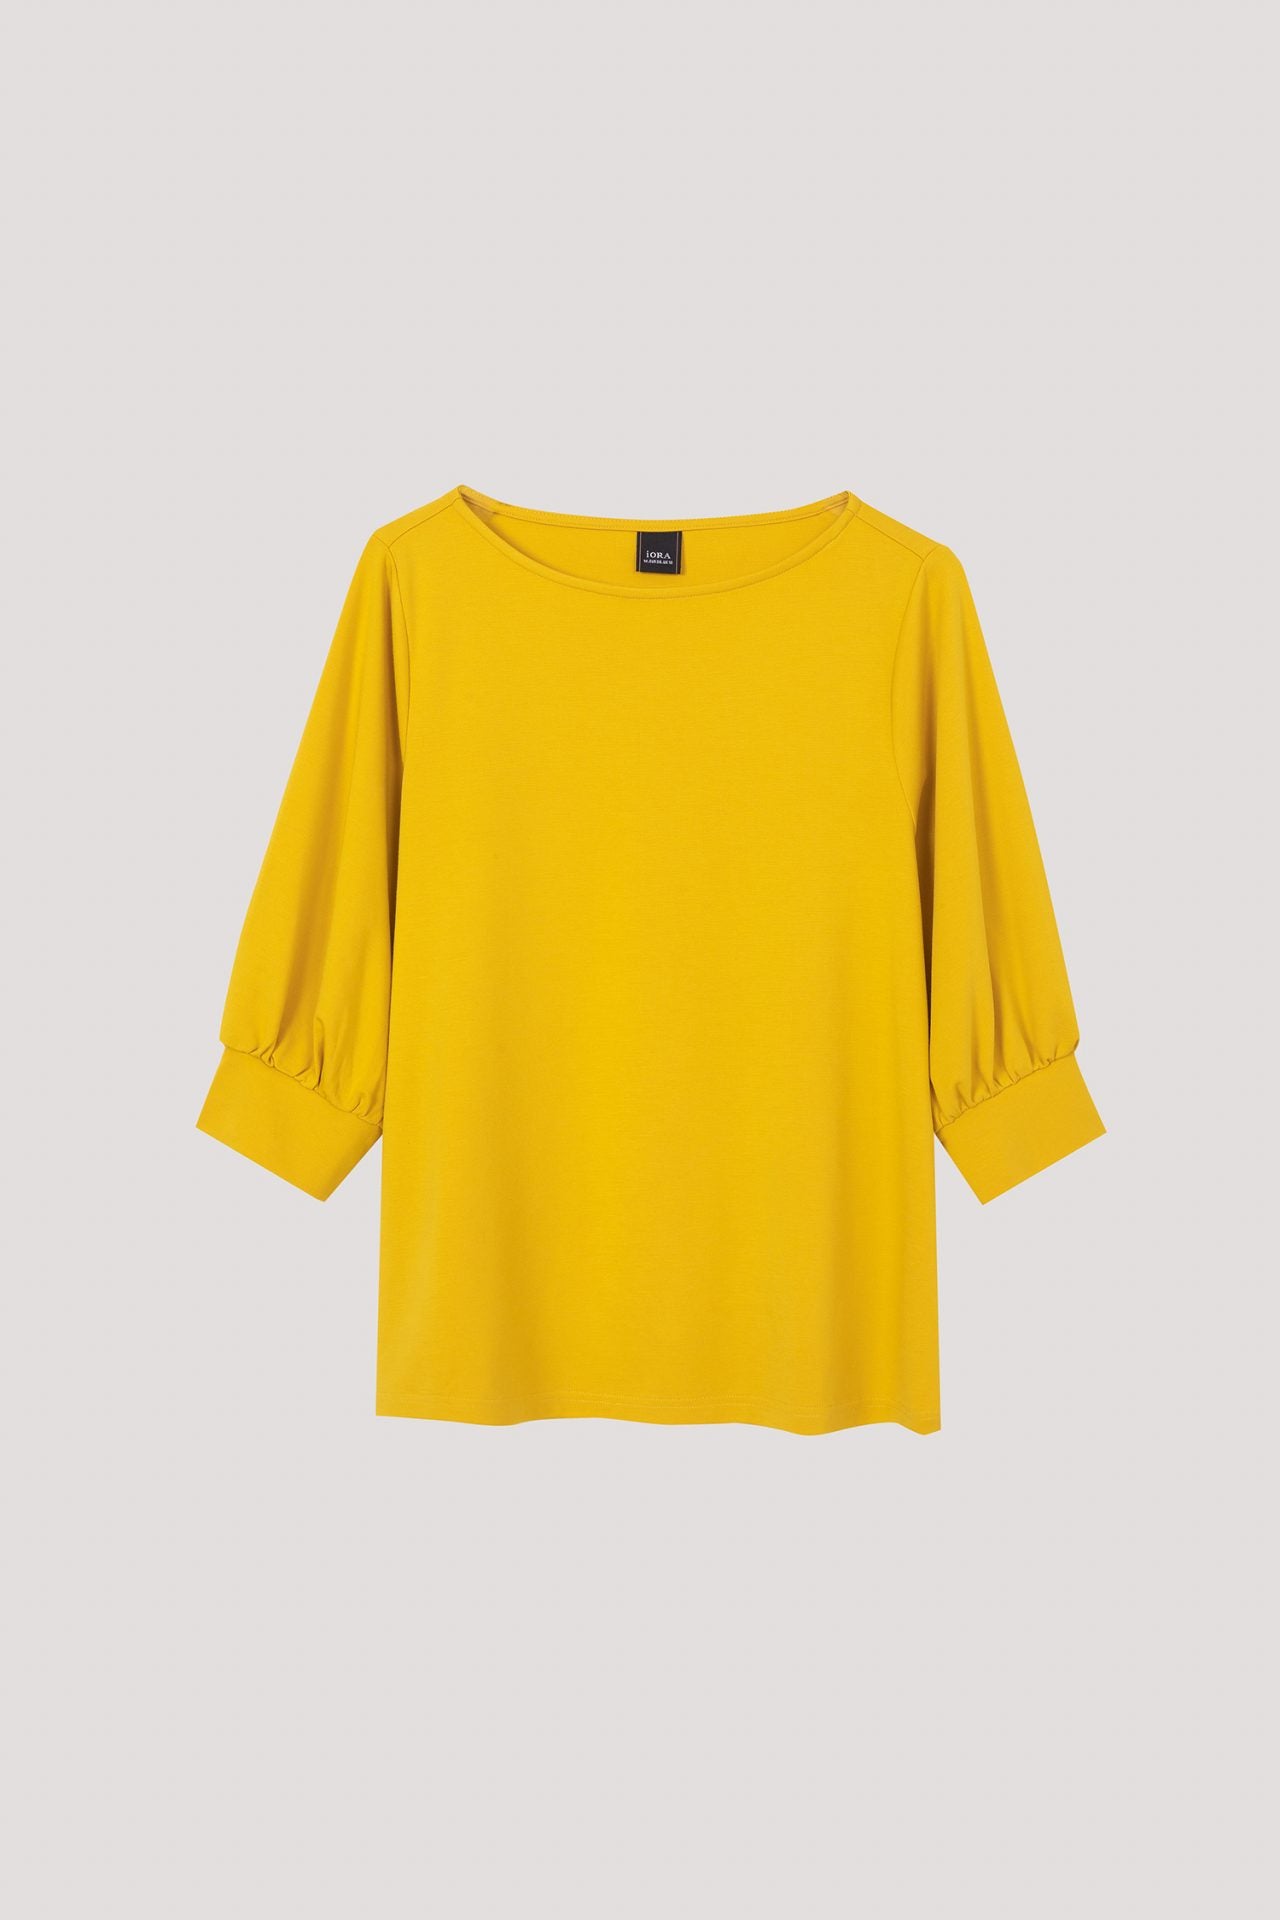 ATB 7295 WIDE NECKLINE PUFFED SLEEVES BLOUSE YELLOW